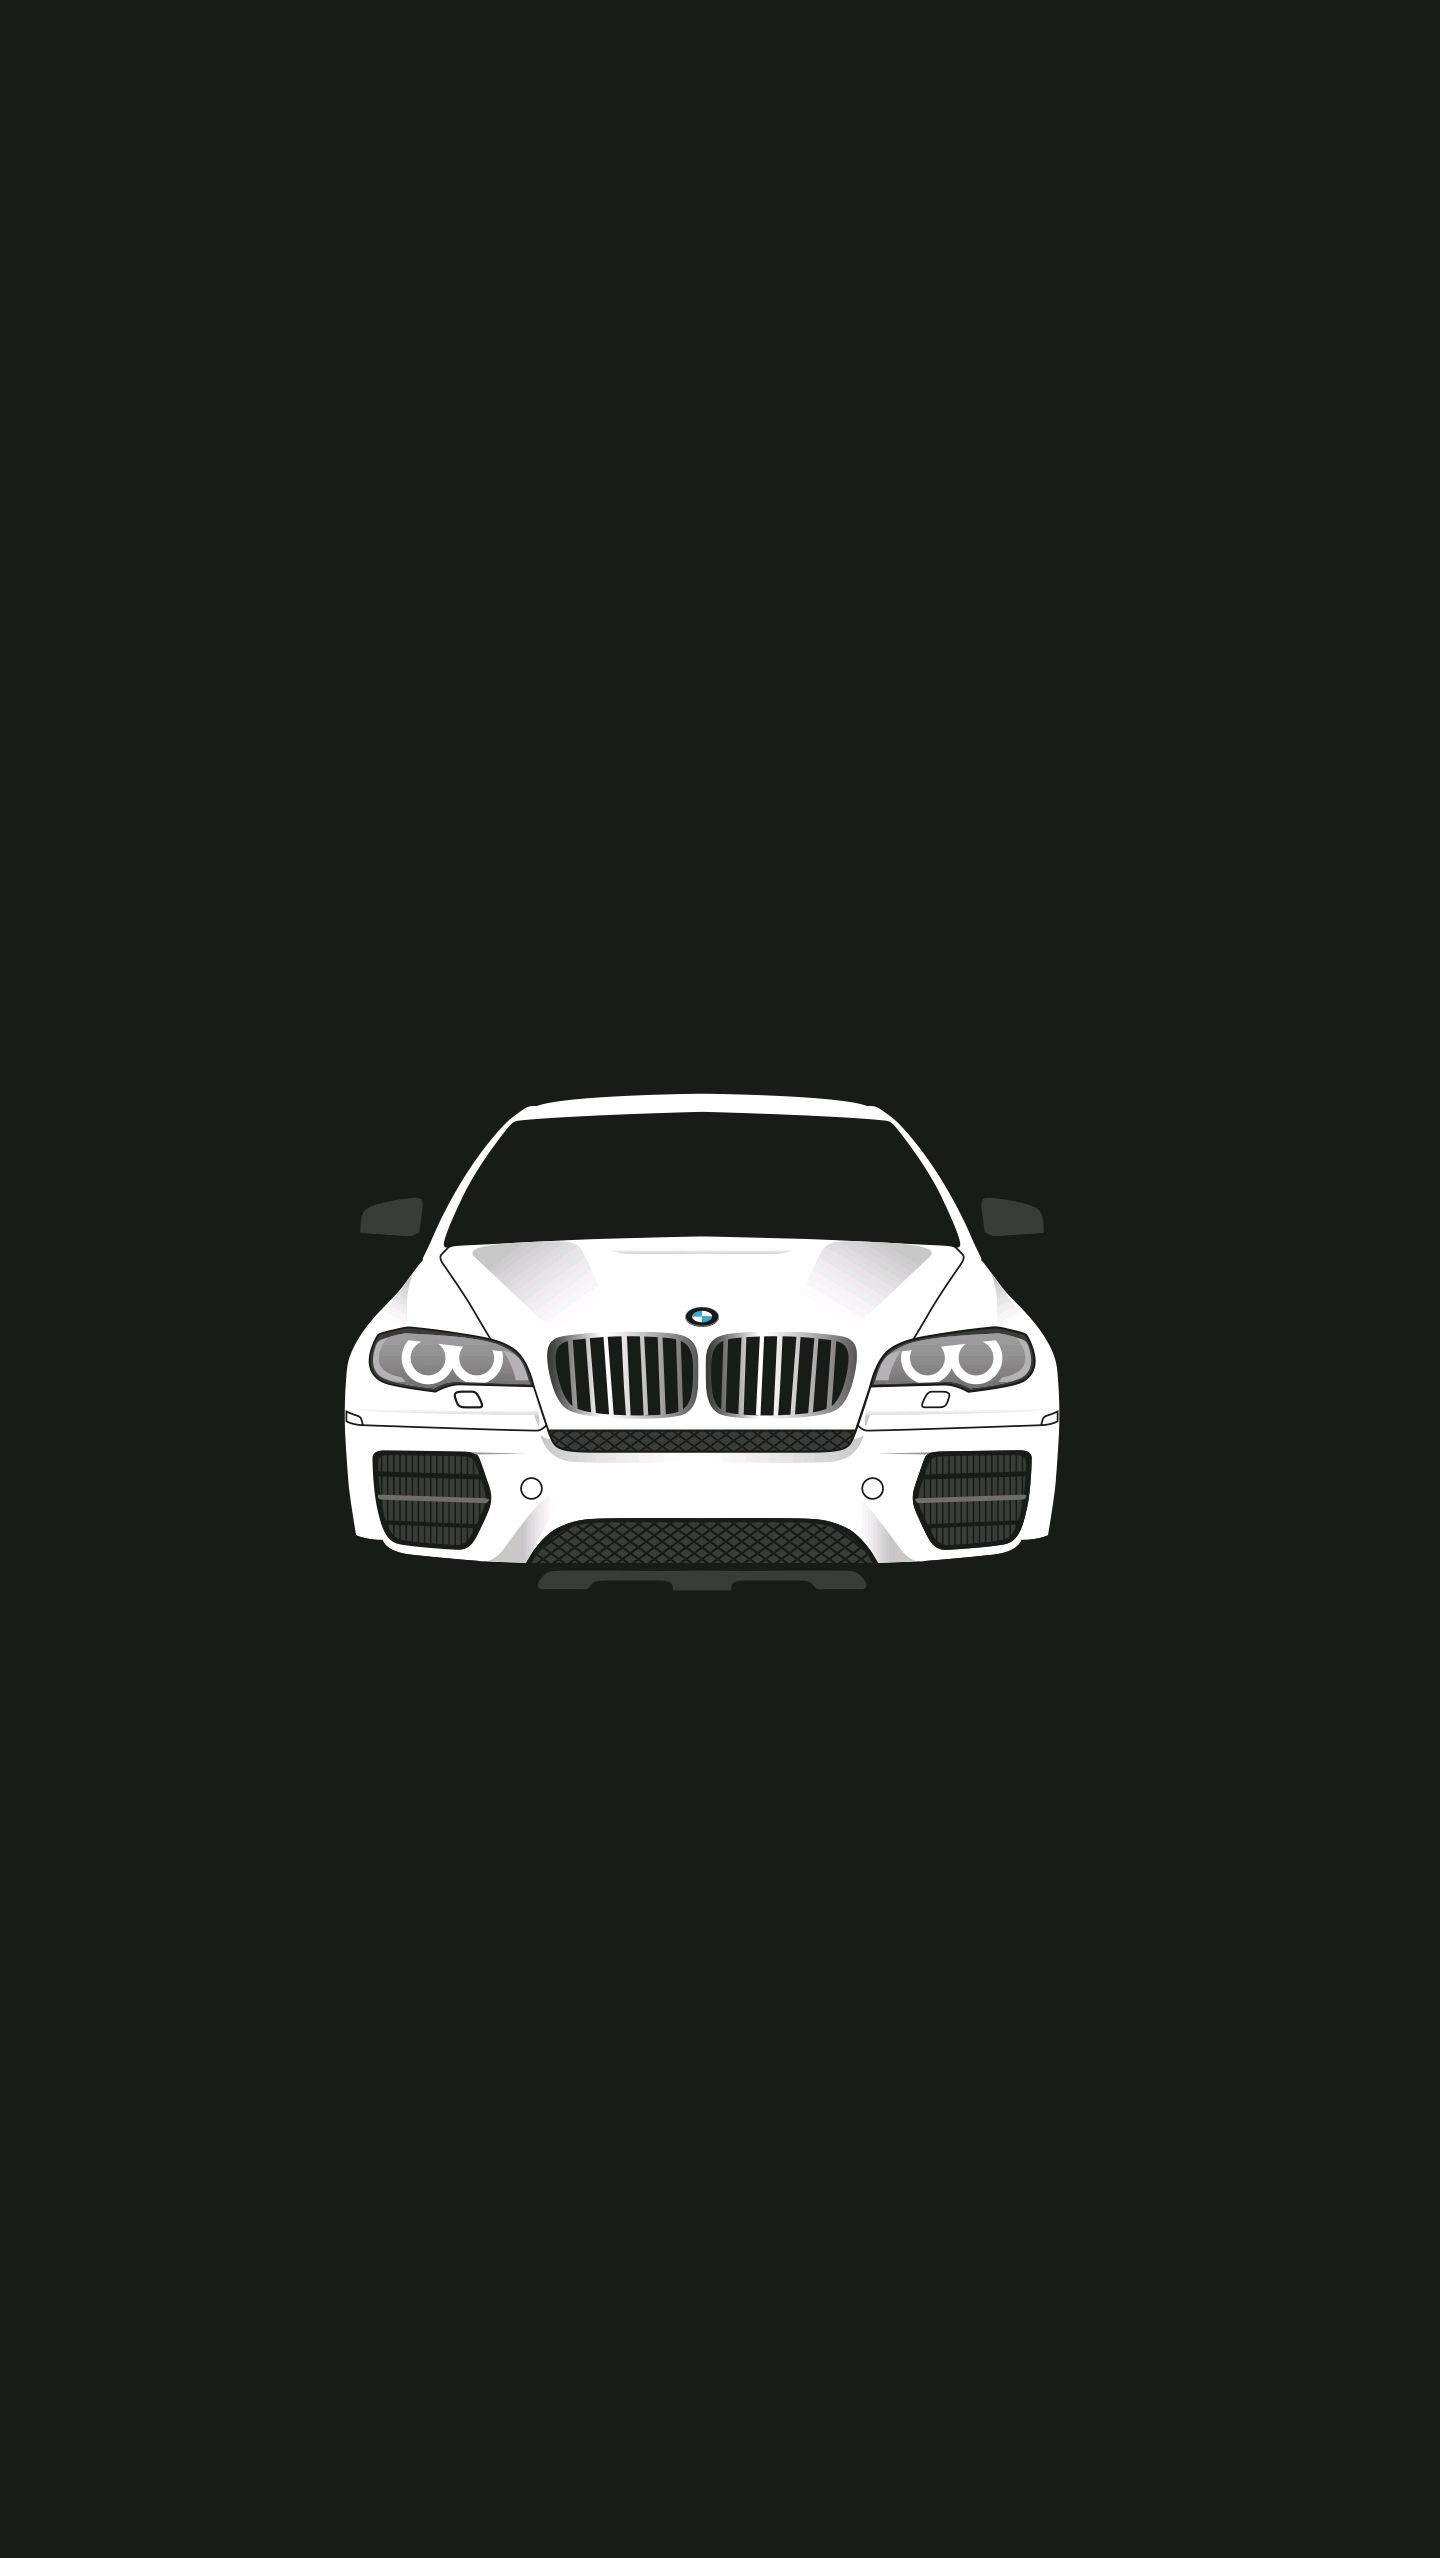 Download 21 cars-wallpapers-for-iphone-6 Iphone-X-Wallpaper-Cars.jpg